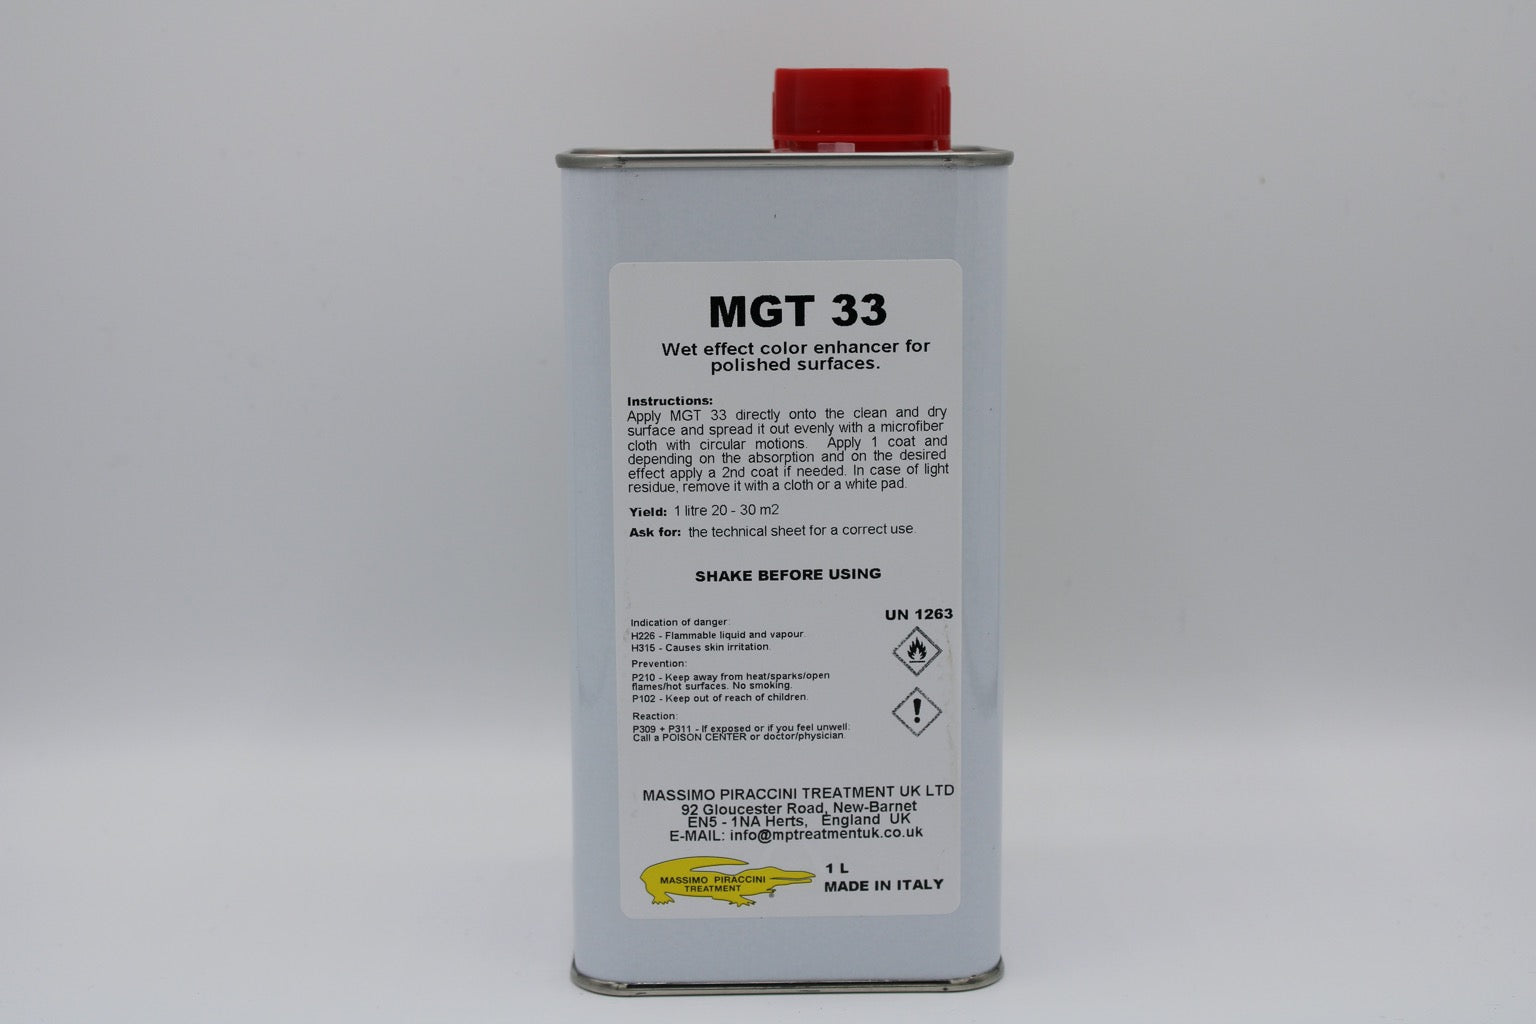 MGT 33 - Colour enhancer with wet effect, stain resistant, concentrated, and specific for polished surfaces